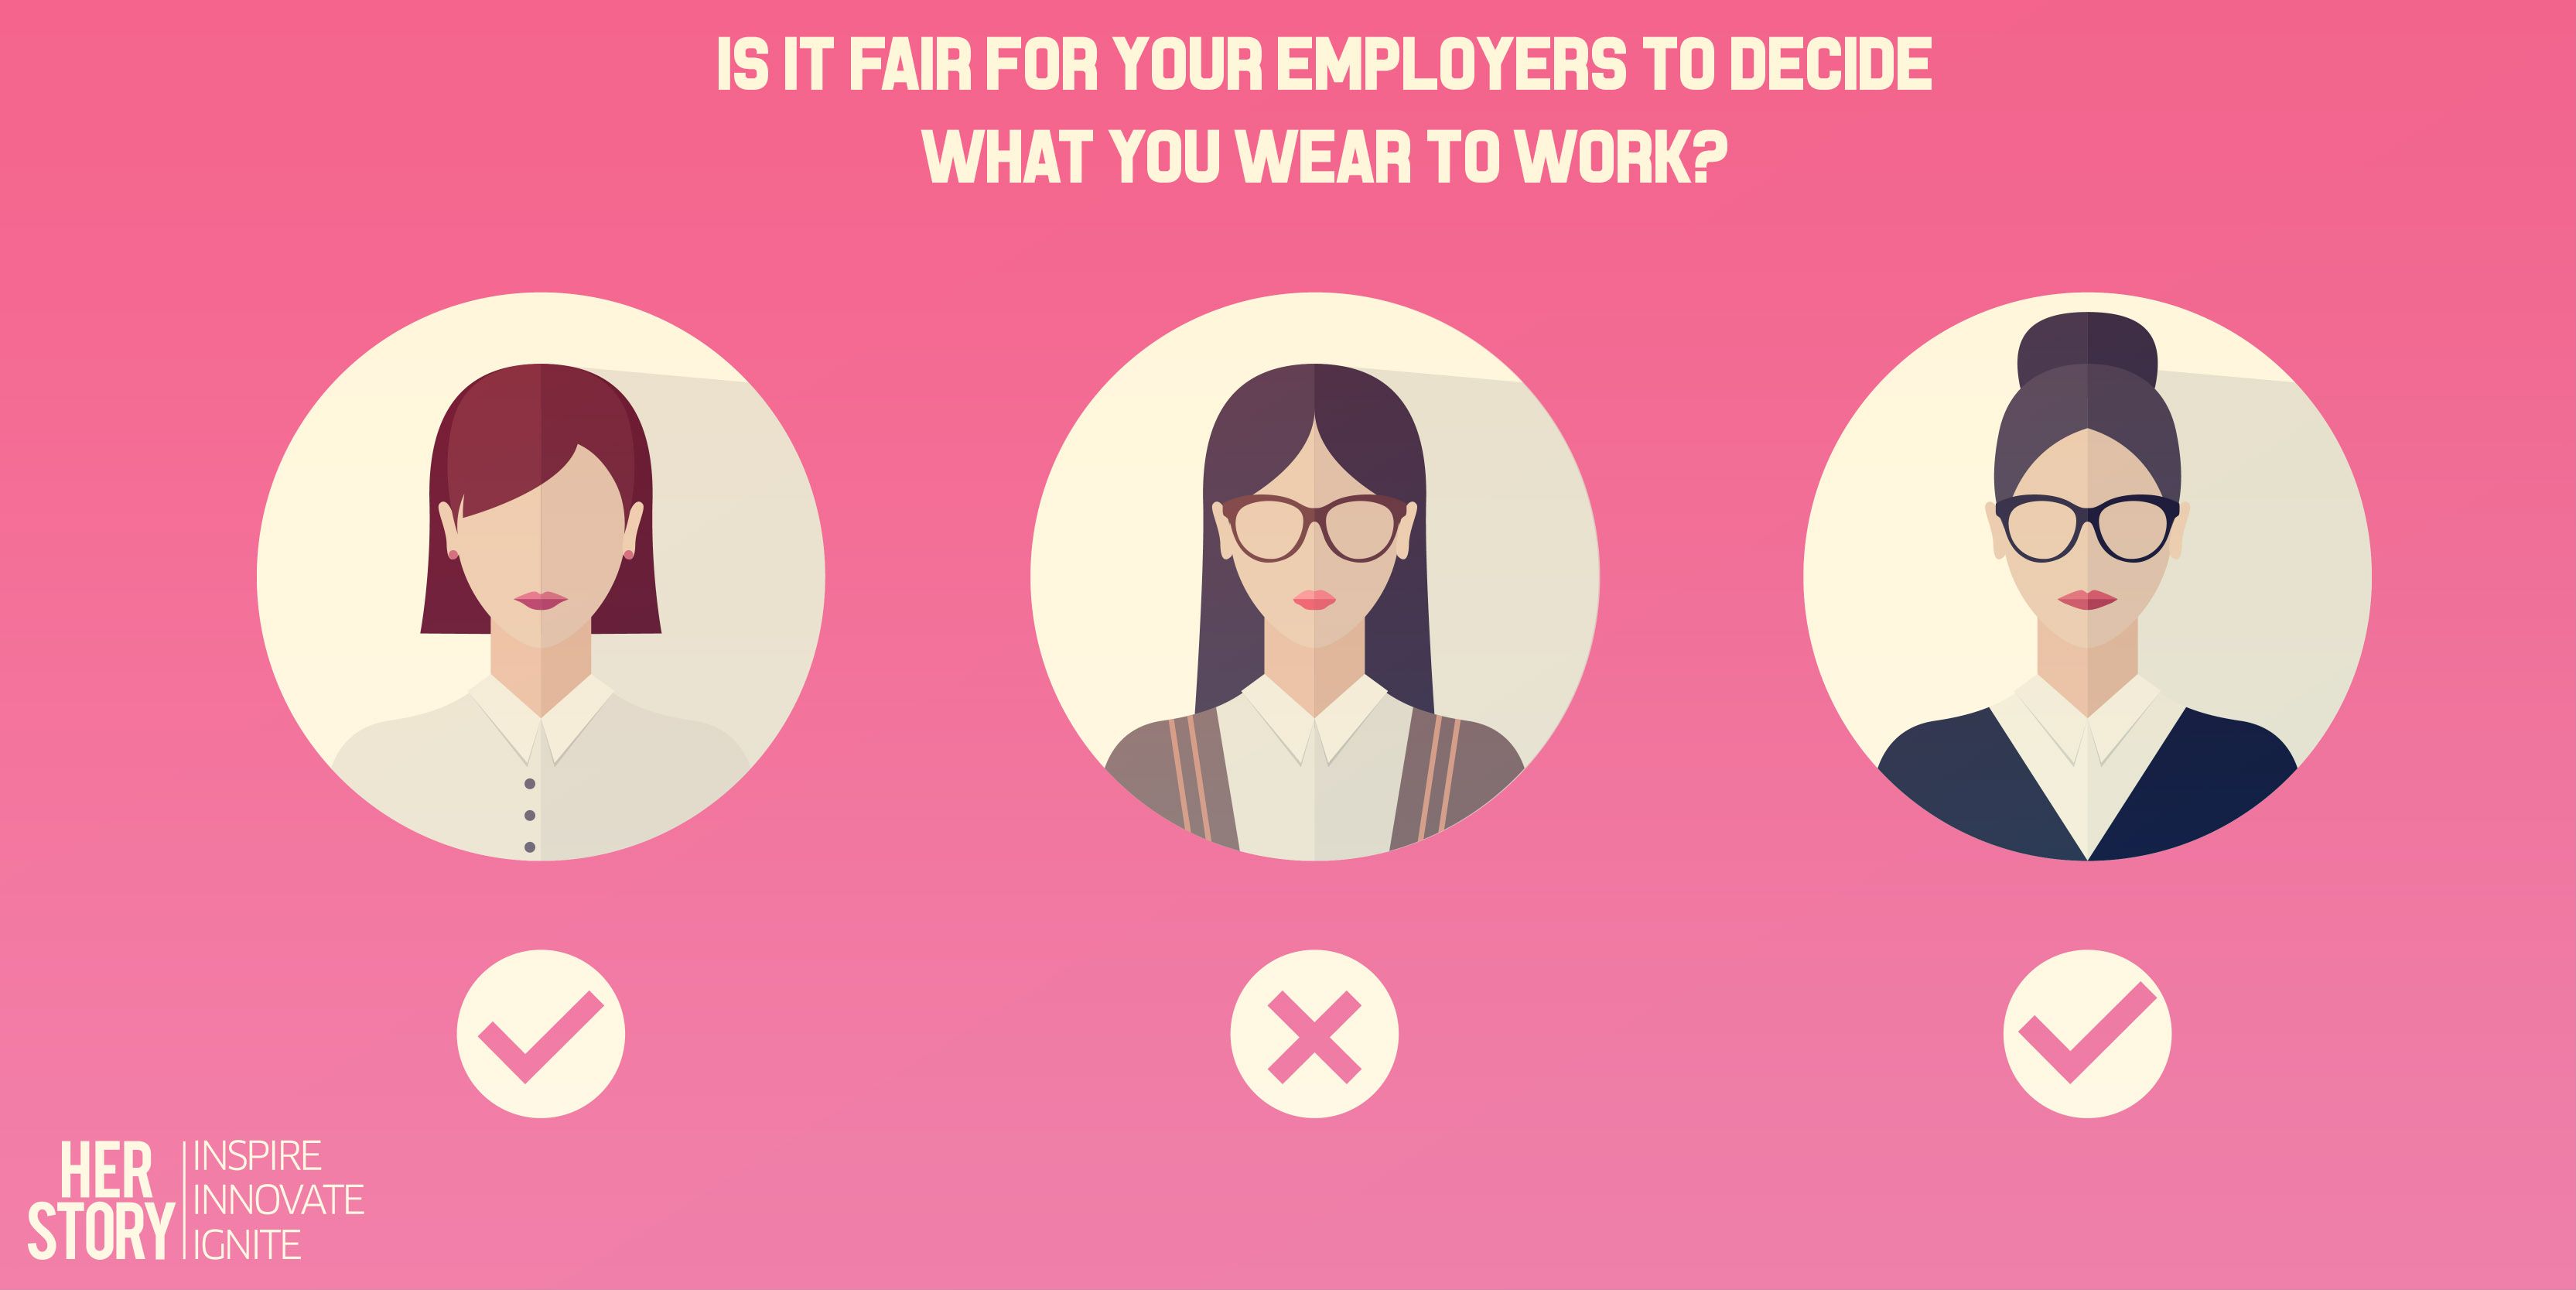 Should your employers decide what you wear to work?